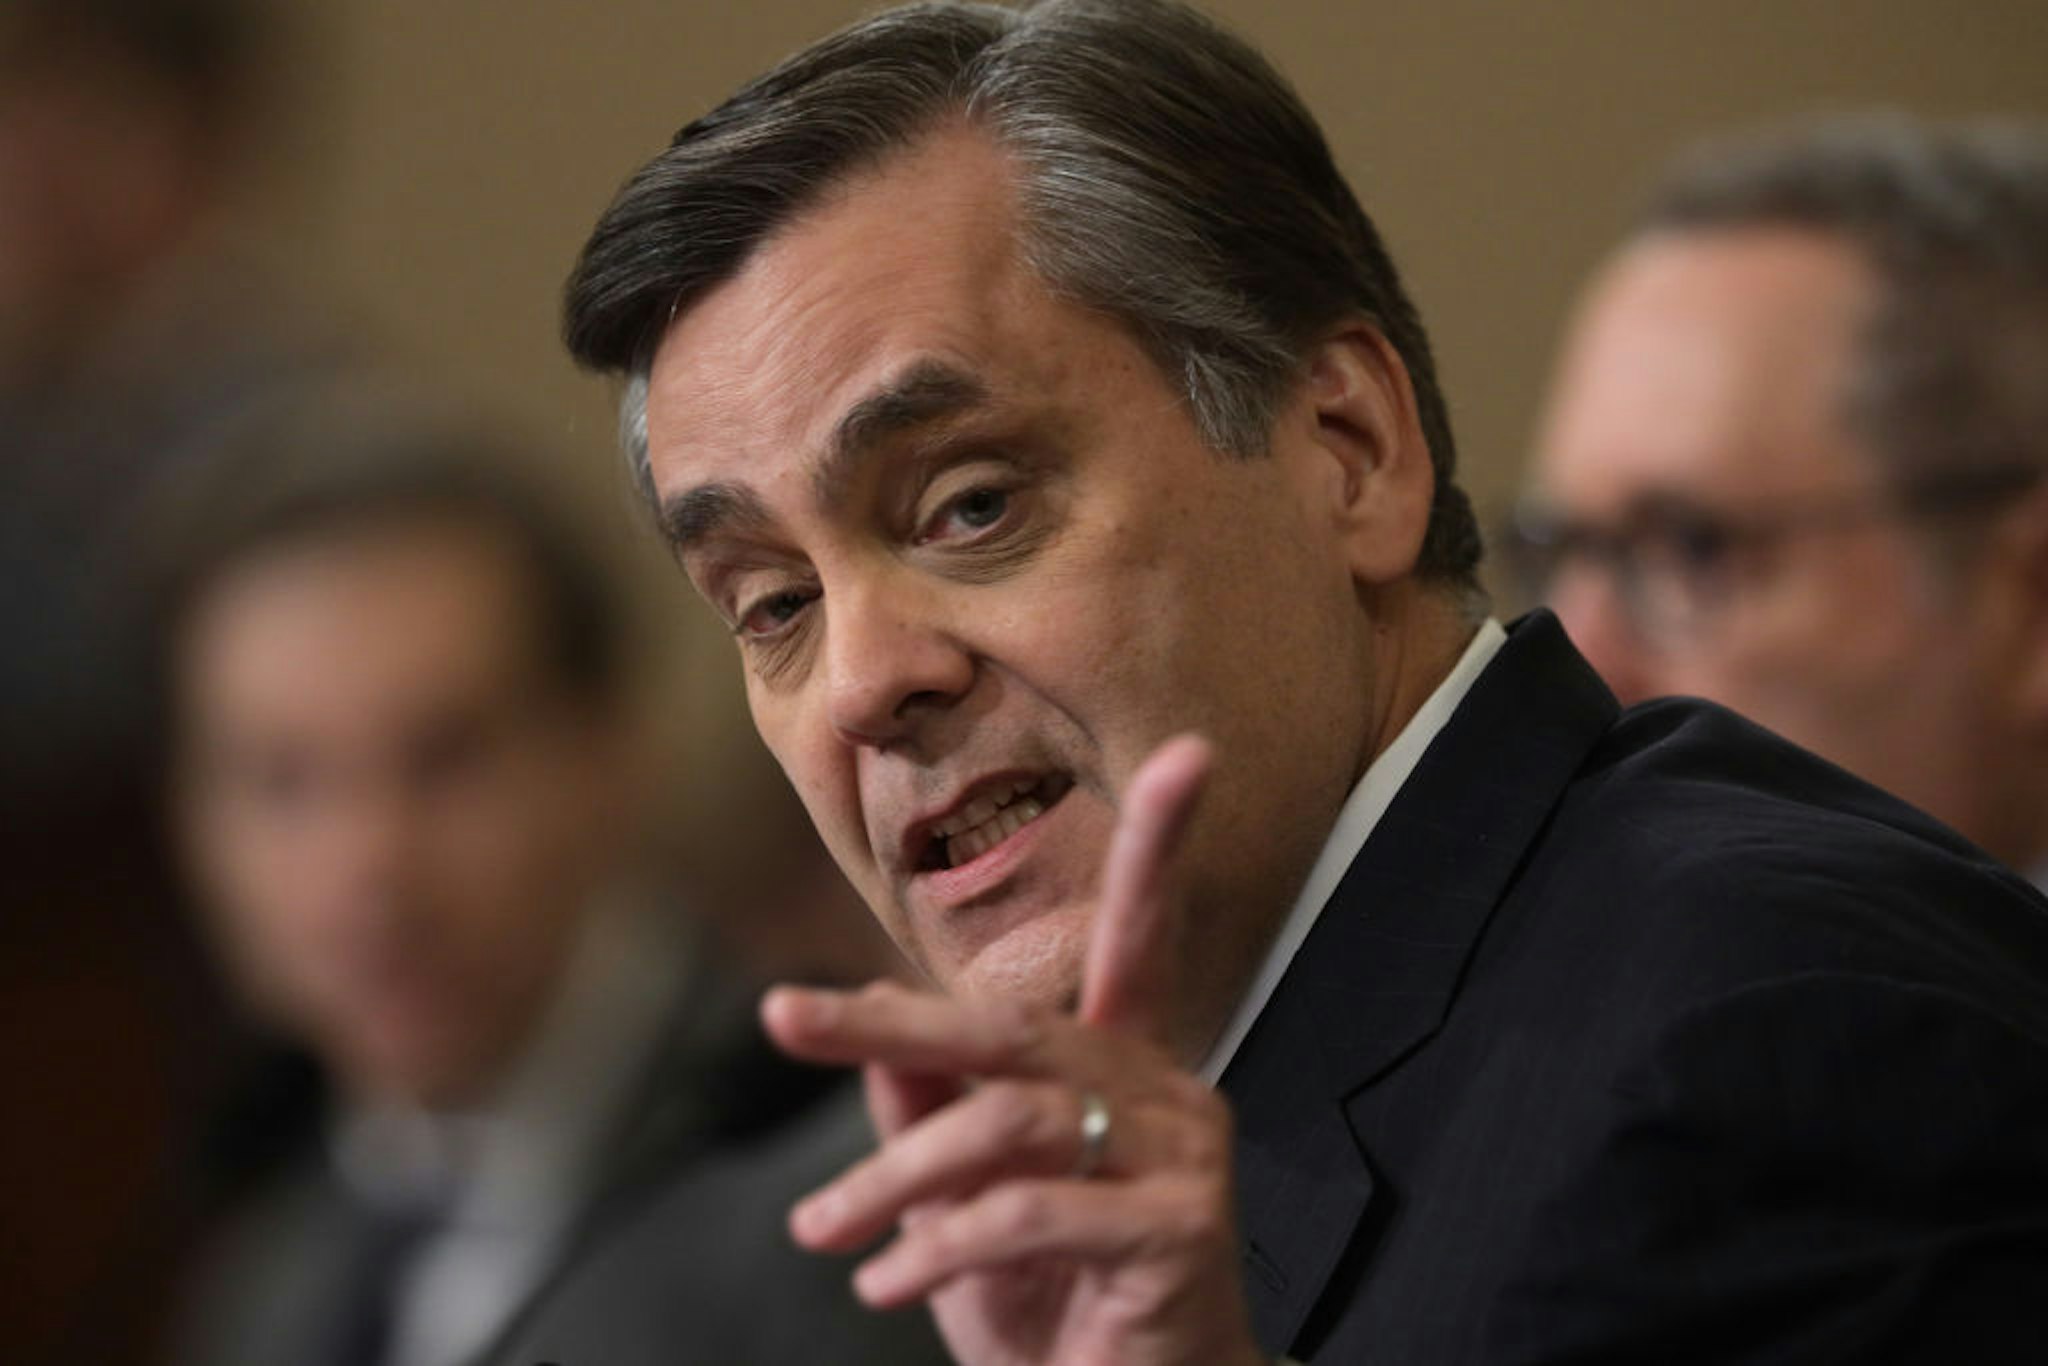 WASHINGTON, DC - DECEMBER 04: Constitutional scholar Jonathan Turley of George Washington University testifies before the House Judiciary Committee in the Longworth House Office Building on Capitol Hill December 4, 2019 in Washington, DC. This is the first hearing held by the House Judiciary Committee in the impeachment inquiry against U.S. President Donald Trump, whom House Democrats say held back military aid for Ukraine while demanding it investigate his political rivals. The Judiciary Committee will decide whether to draft official articles of impeachment against President Trump to be voted on by the full House of Representatives. (Photo by Alex Wong/Getty Images)